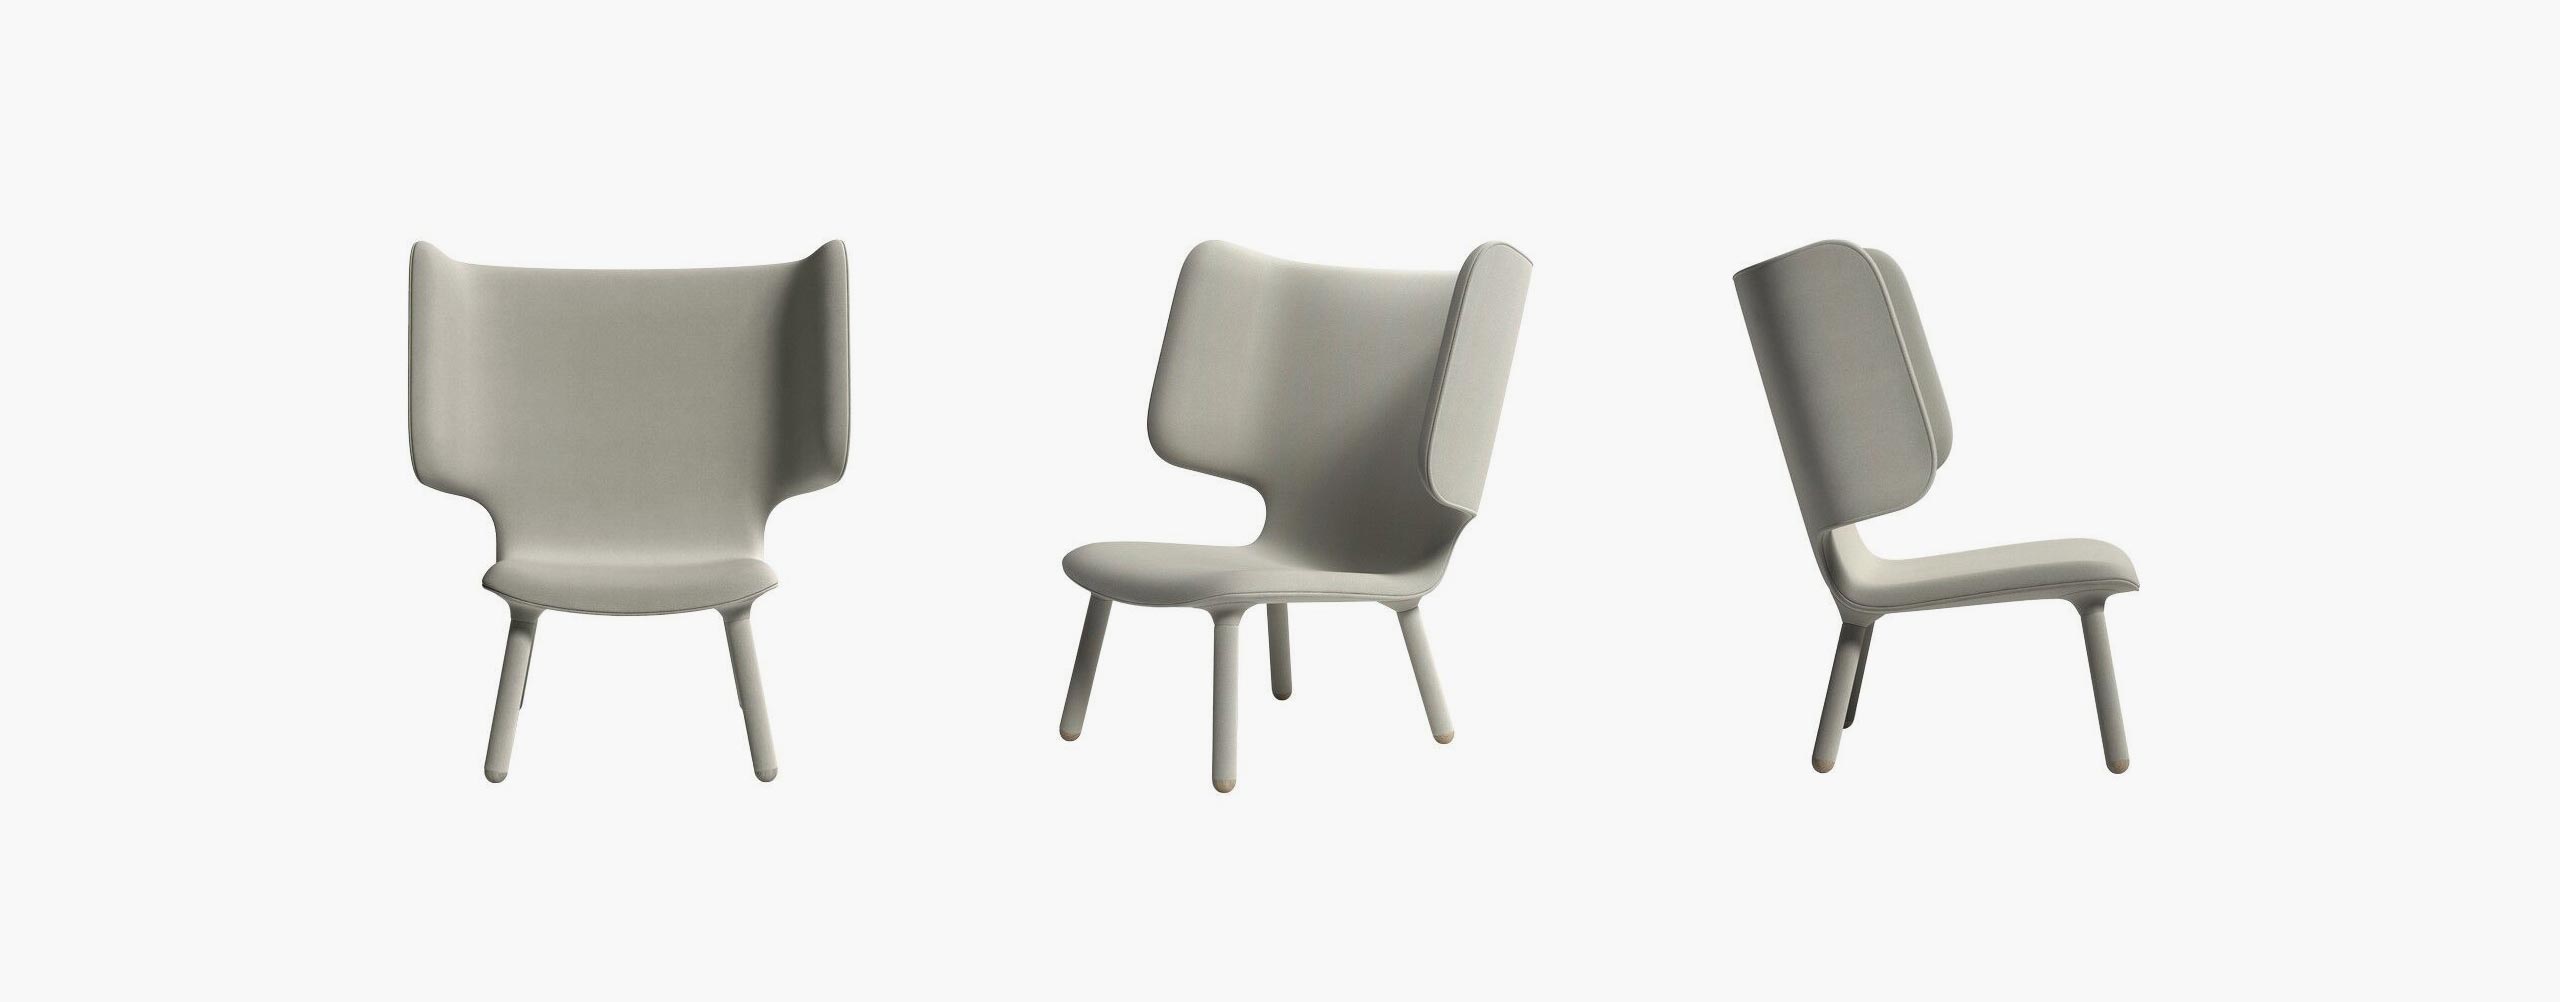 New Works' Tembo chair - 3d model & CGI by Design Connected